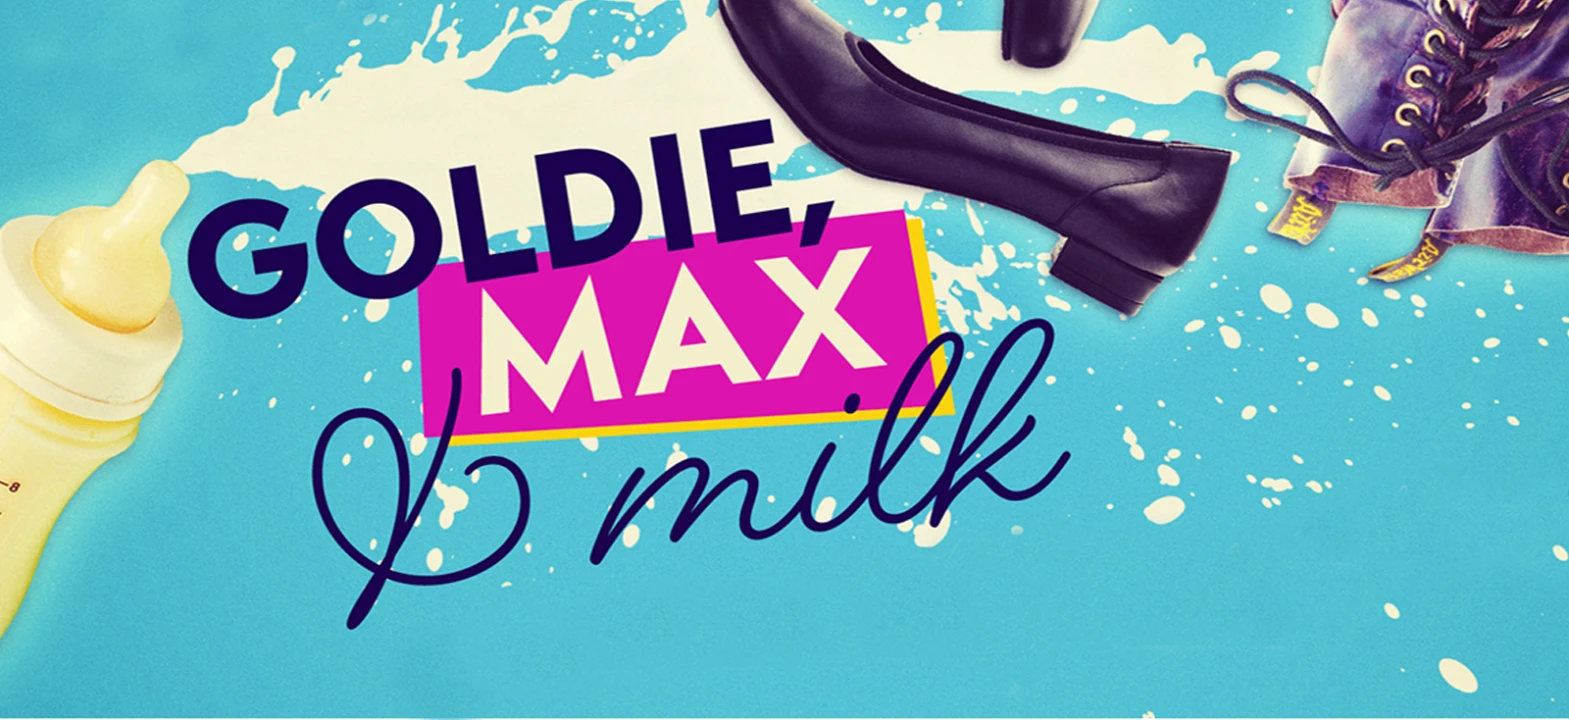 Goldie, Max, and Milk: What to expect - 1